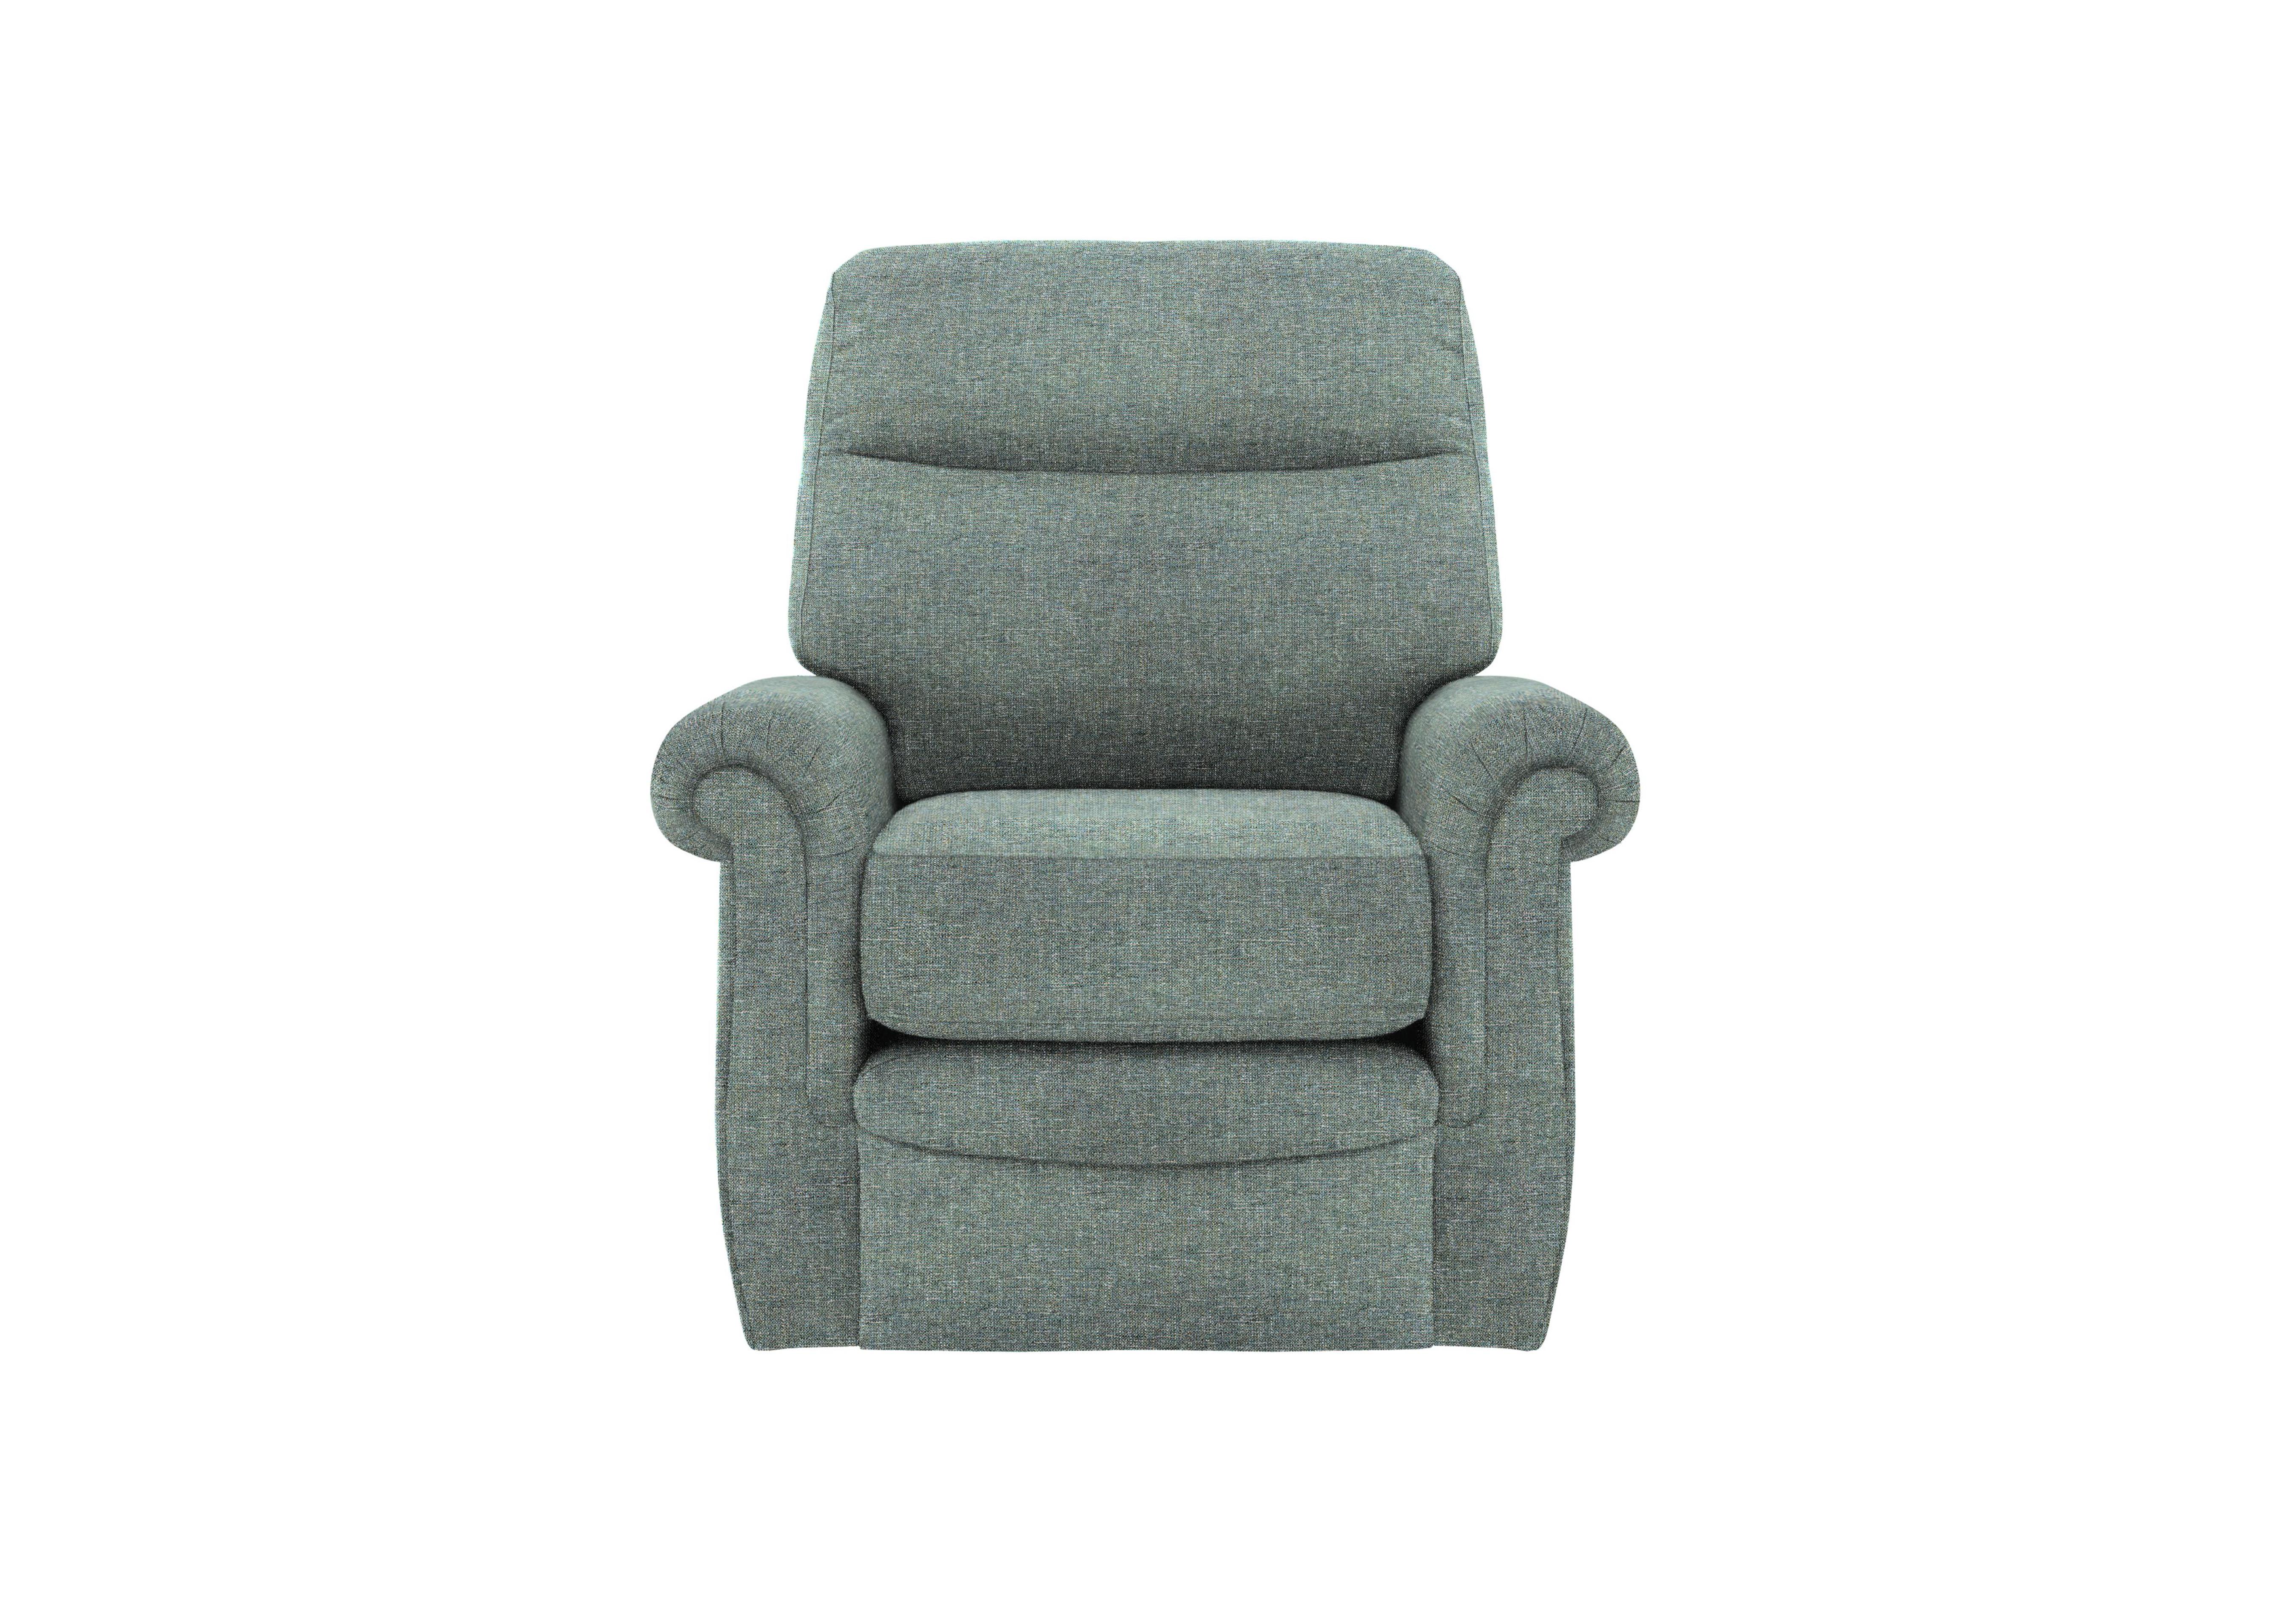 Avon Fabric Lift and Rise Armchair in A020 Dapple Kingfisher on Furniture Village